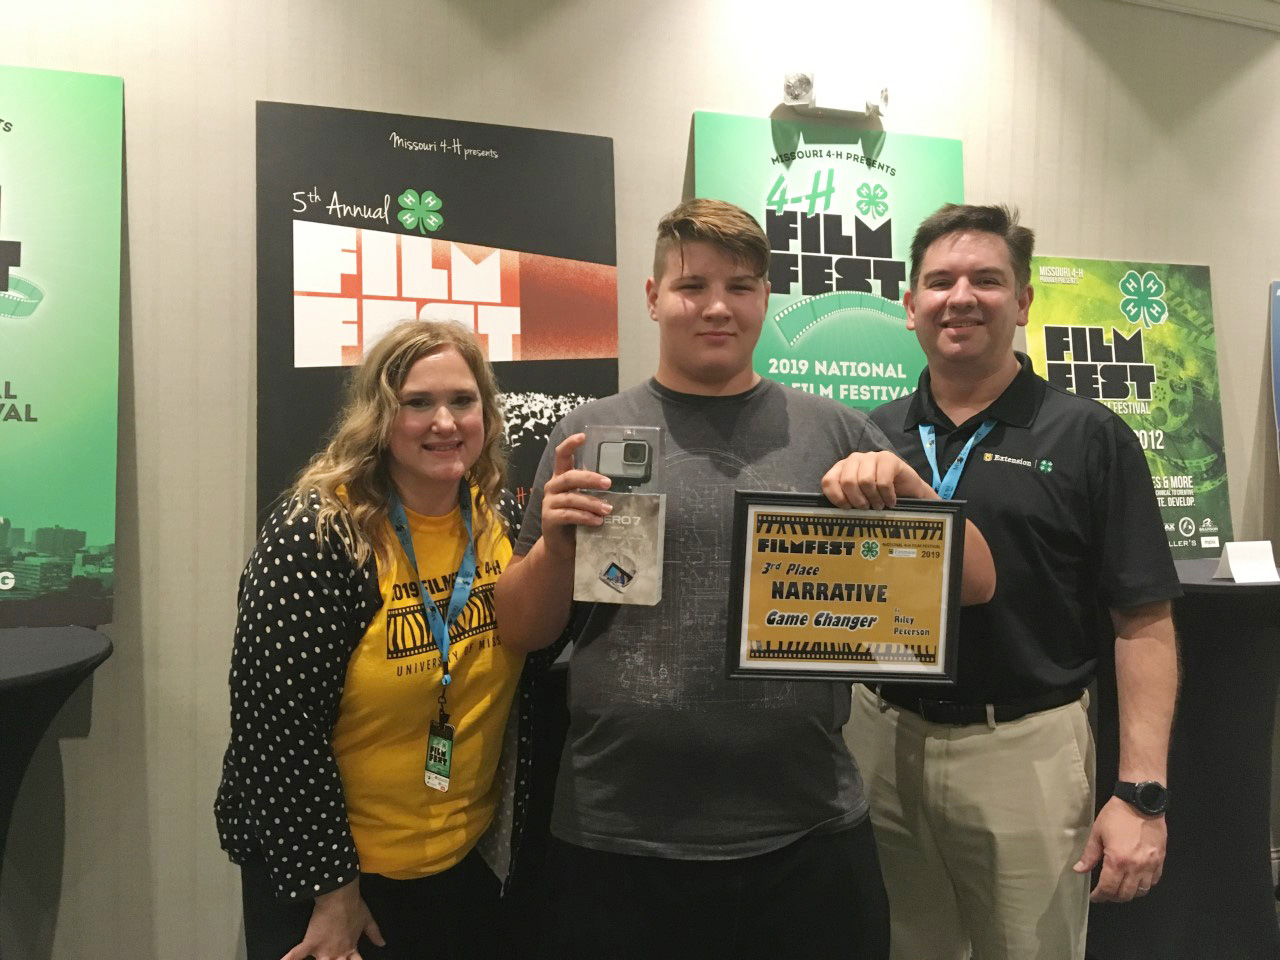 Riley Peterson (center) earned 3rd place for his narrative video, “Game Changers.”